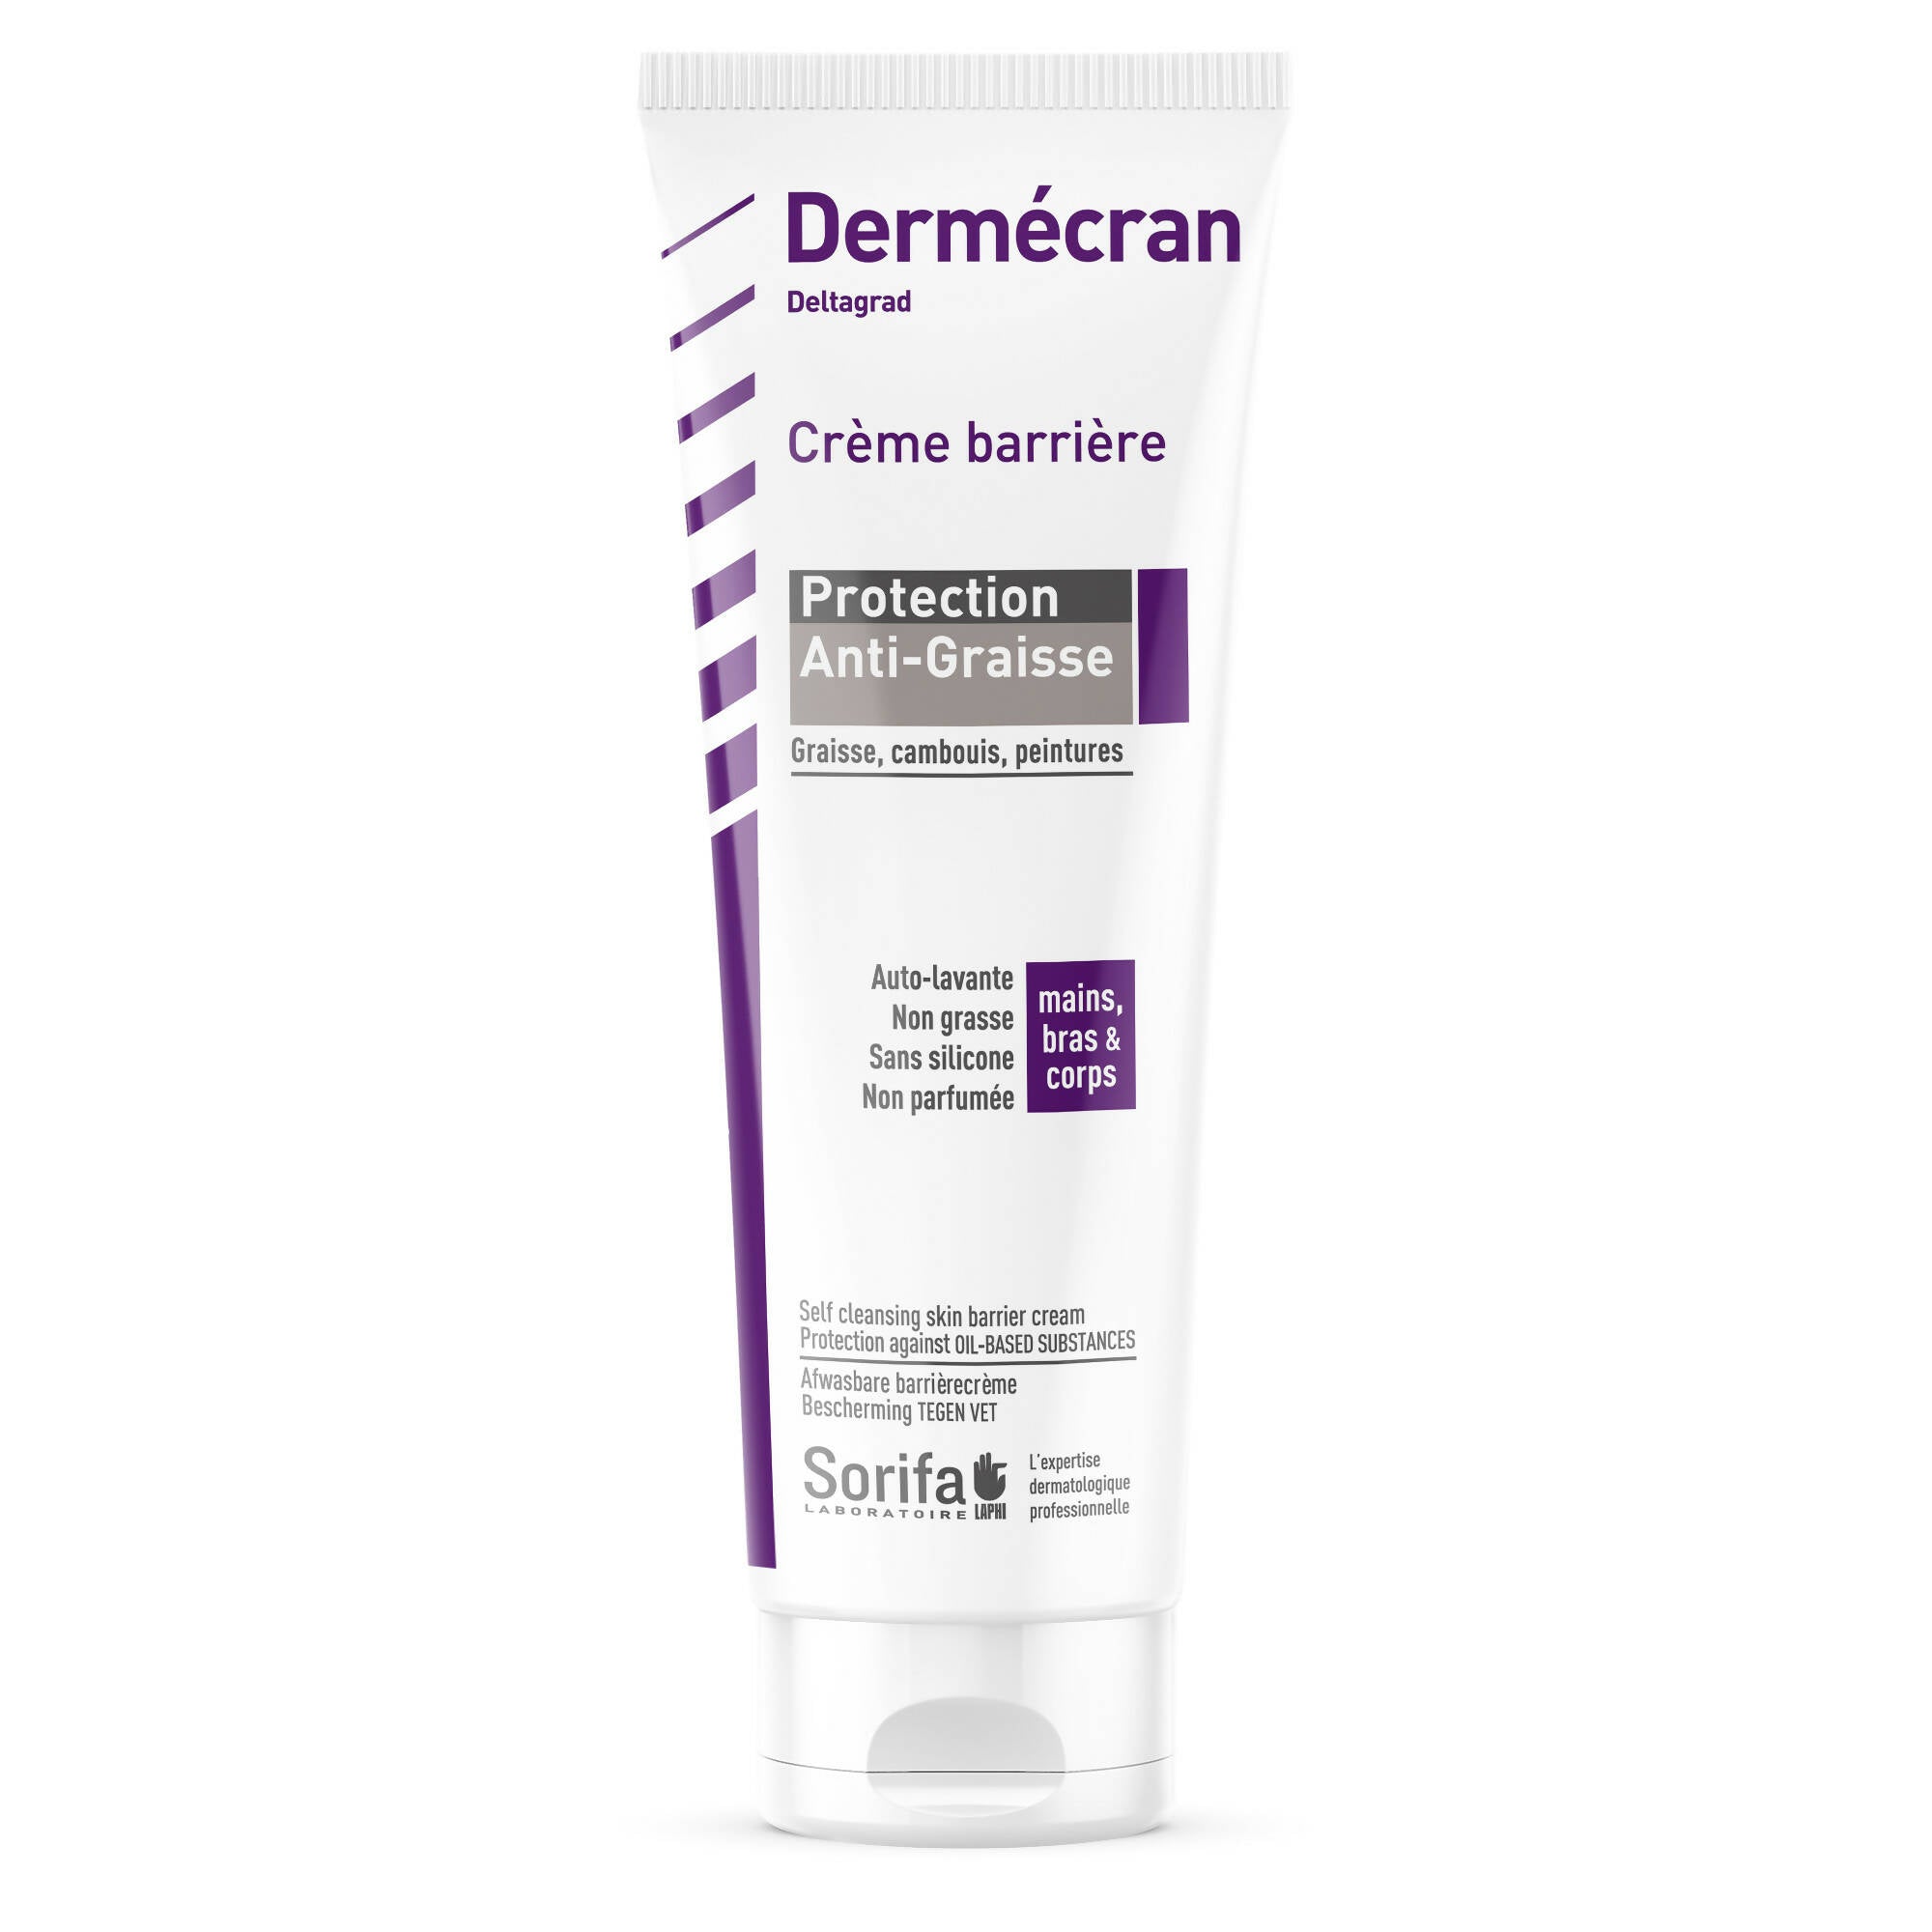 SORIFA - Complete box of 24 - Dermscreen - Barrier Cream - ANTI-GREASE Protection / Deltagrad - Hands, arms and body - High tolerance - Fragrance-free - 125 ml tube. - 0